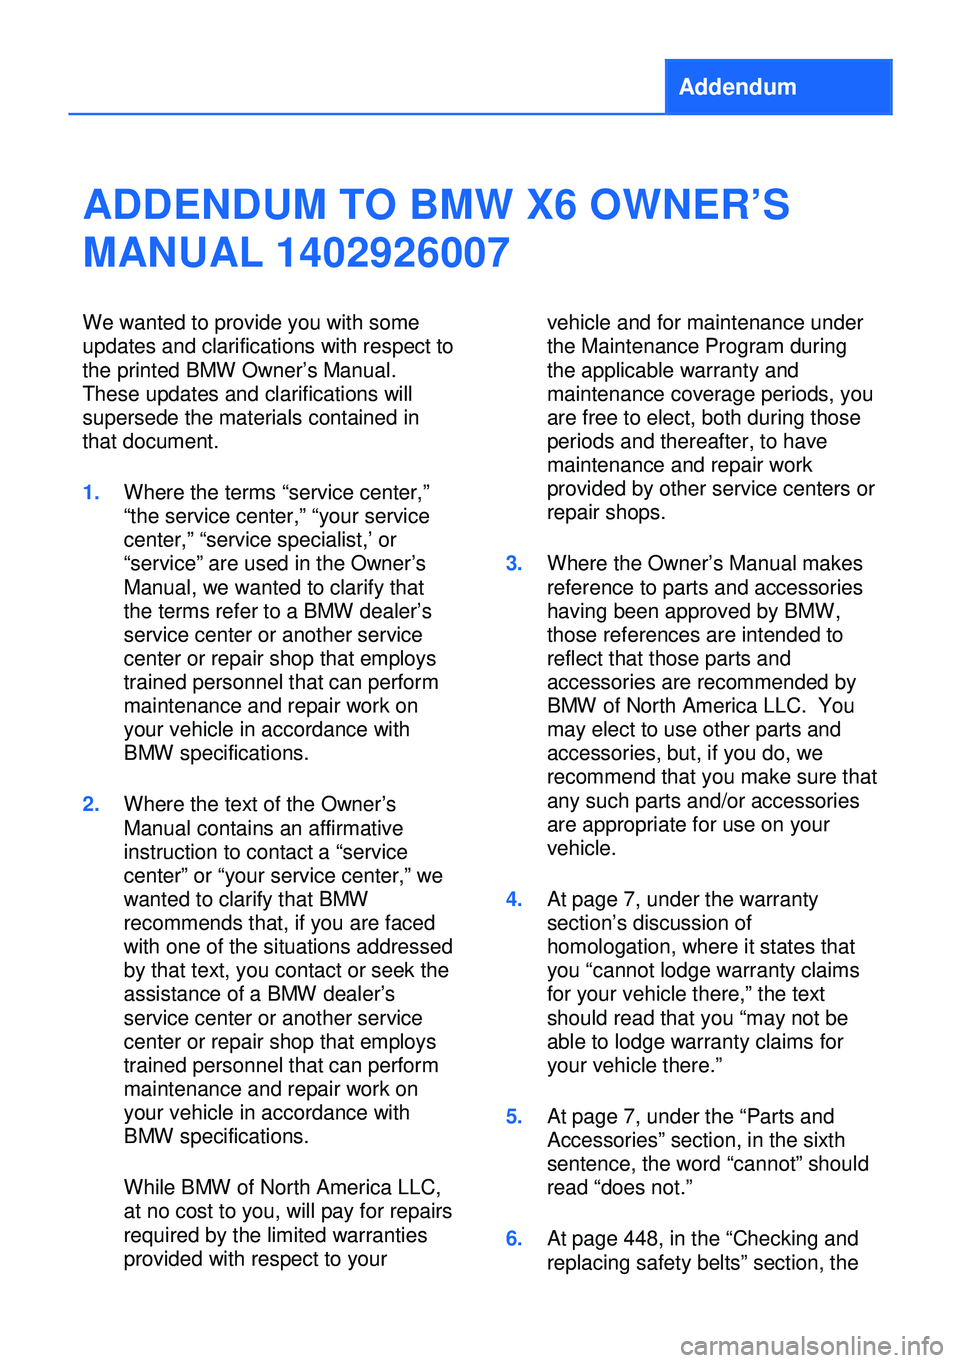 BMW X6 2013 E71 Owners Manual Addendum
ADDENDUM TO BMW X6 OWNER’S
MANUAL 1402926007
We wanted to provide you with some
updates and clarifications with respect to
the printed BMW Owner’s Manual.
These updates and clarifications